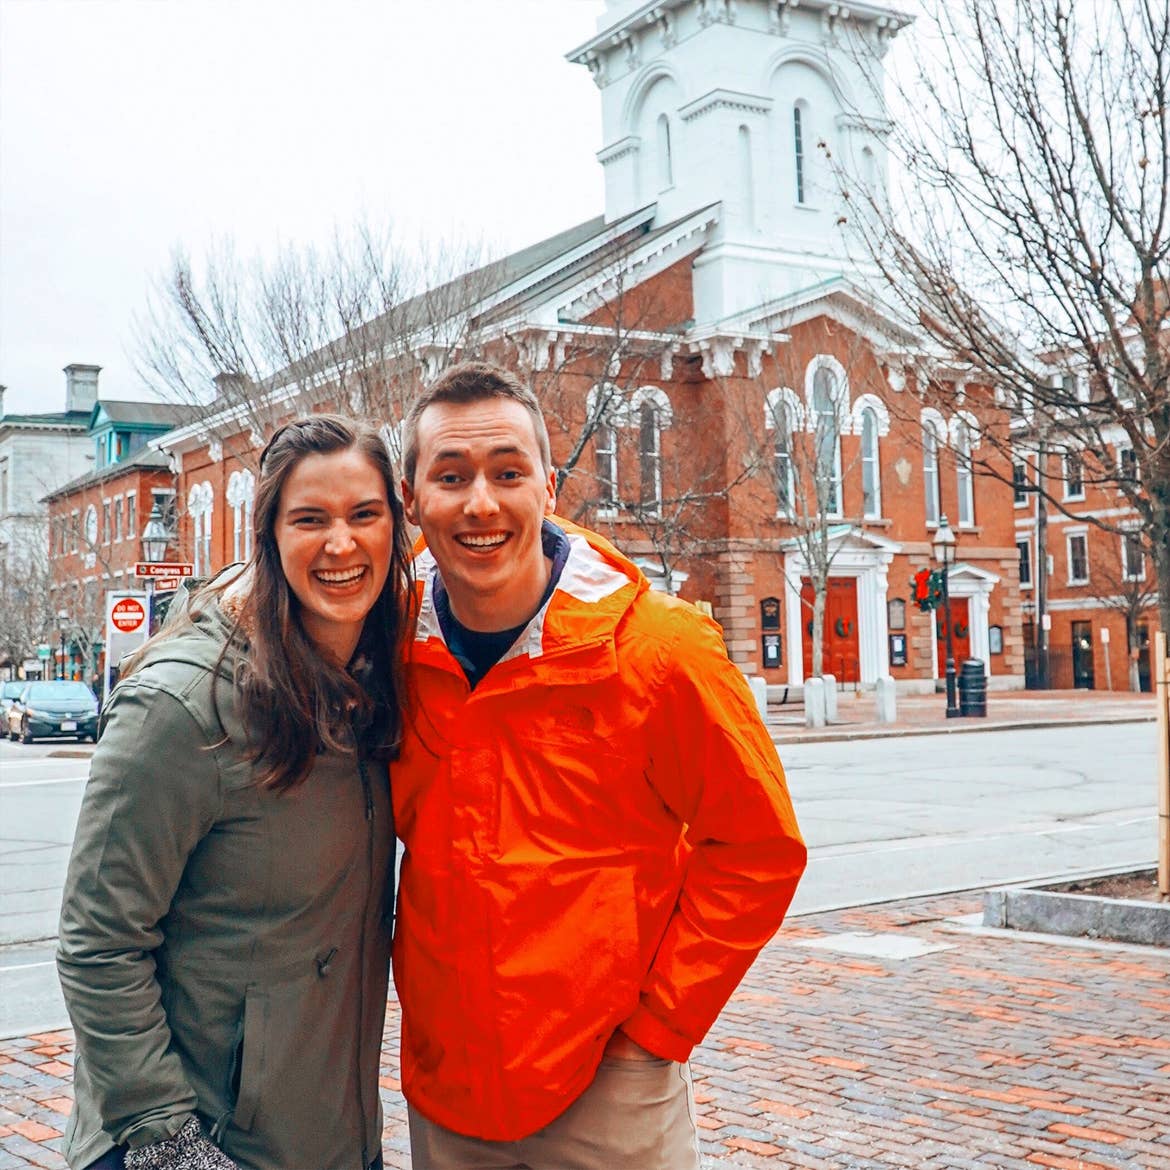 A woman in a green jacket and a man in an orange jacket pose on a snow-covered street near a historical brick building.